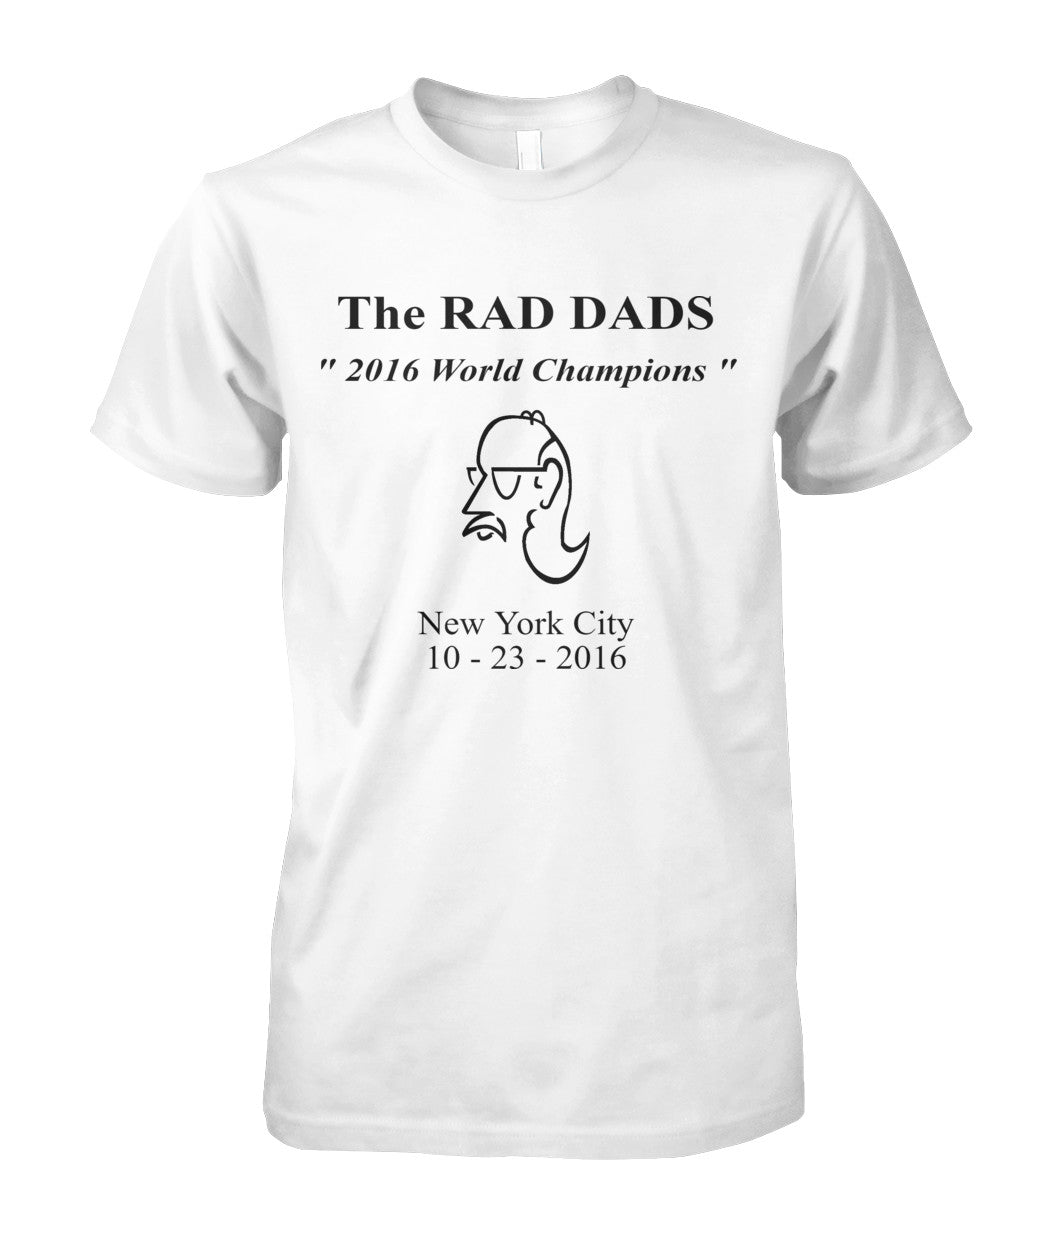 the (official) 2016 NYC championship tee